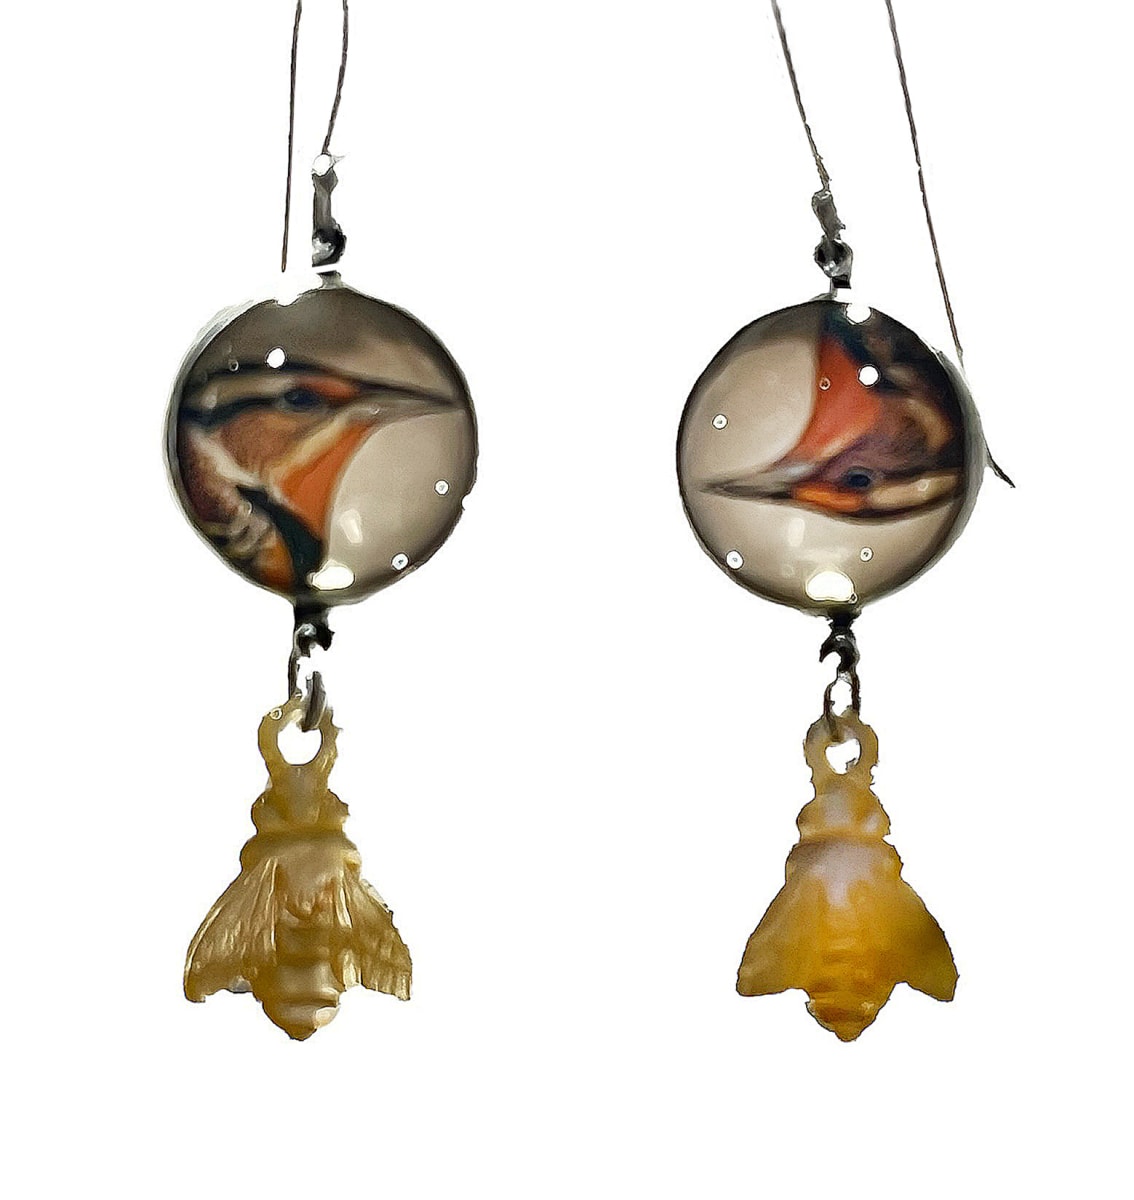 Earring #5 by Denise Barr  Image: Sterling silver, Mother of Pearl hand carved bee, found vintage bird image under quartz crystal